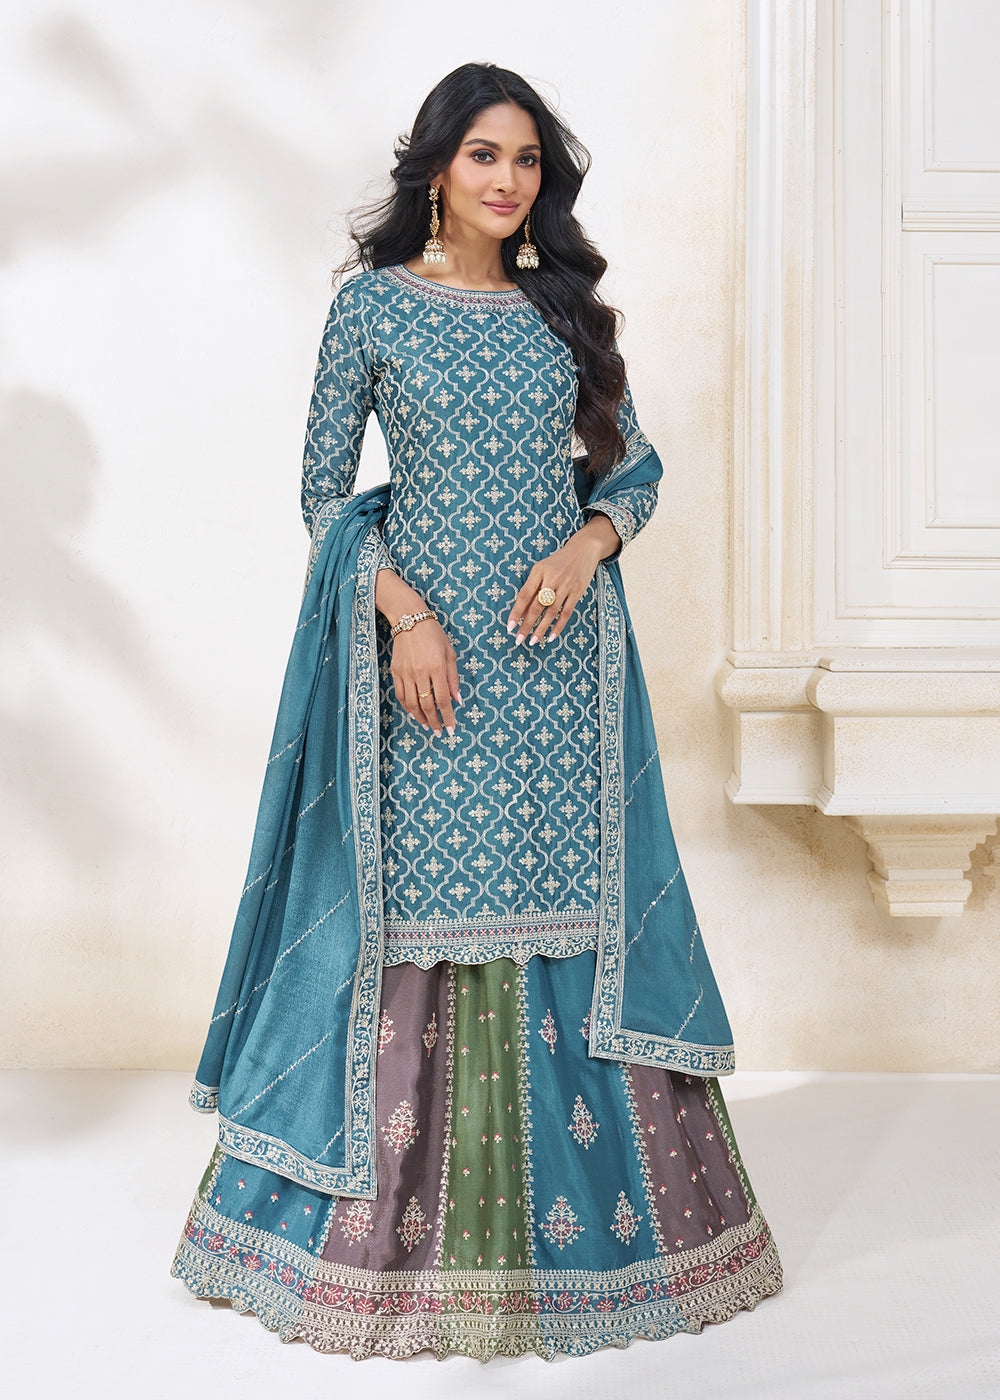 Buy Now Blue Multicolor Sequins Embroidered Lehenga Skirt Suit Online in USA, UK, Australia, New Zealand, Canada & Worldwide at Empress Clothing.